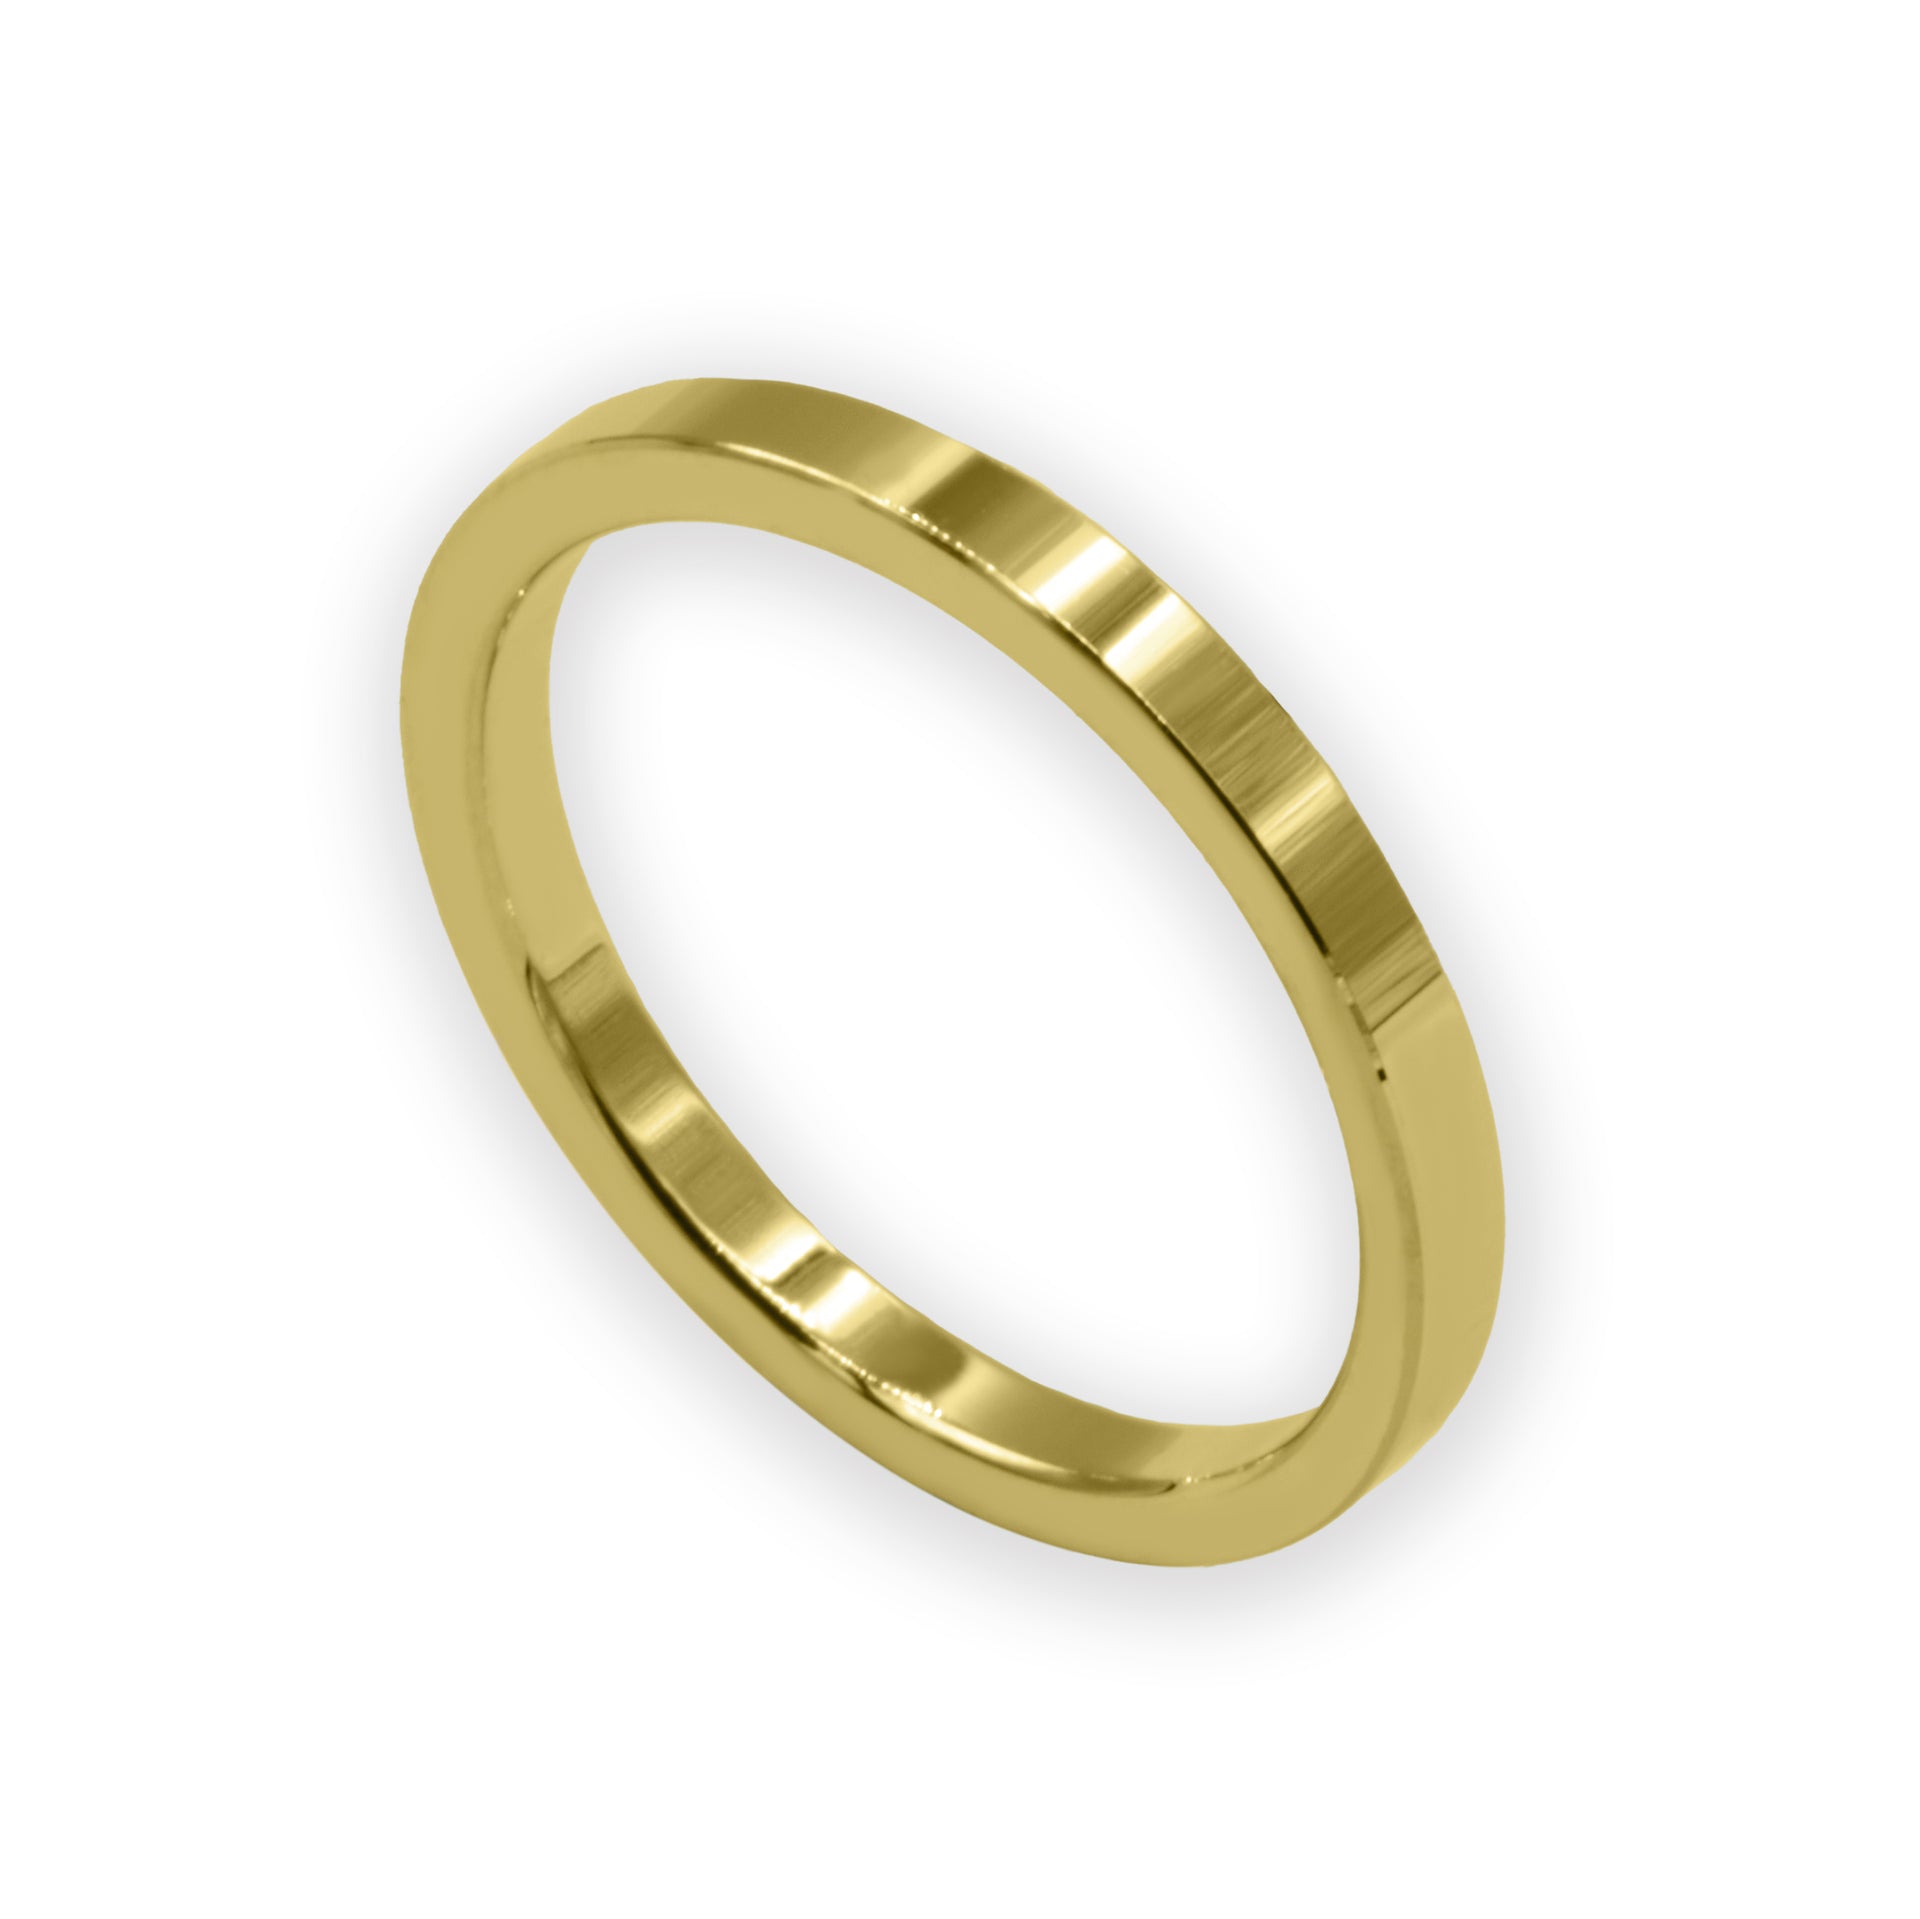 Ring EARTH IS ROUND 2mm flat profile yellow gold 18k